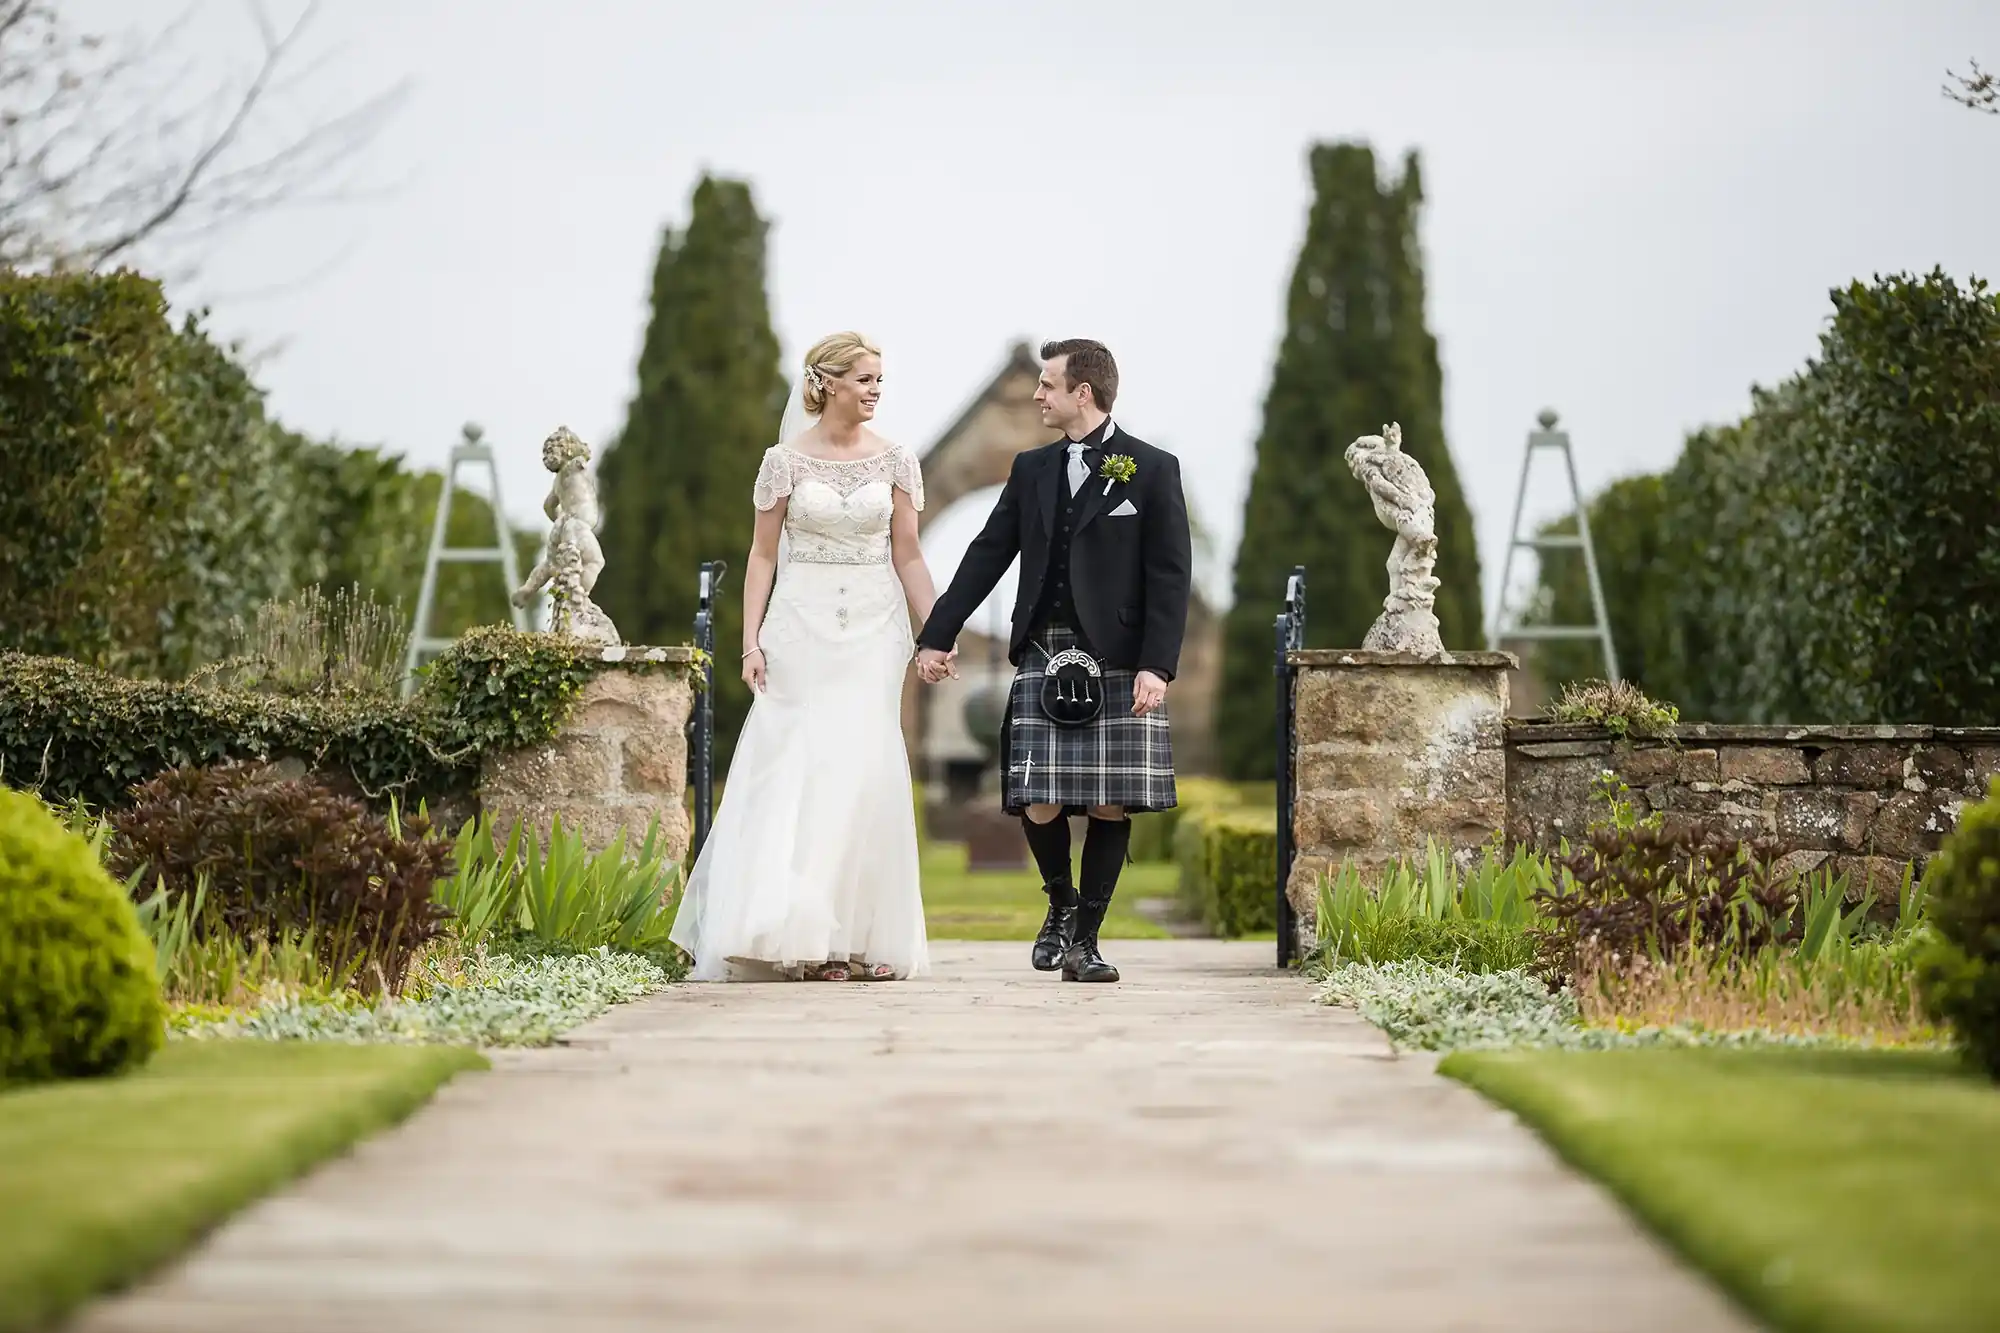 A bride in a white dress and a groom in a kilt holding hands while walking down a garden path, with statues on pedestals on both sides.